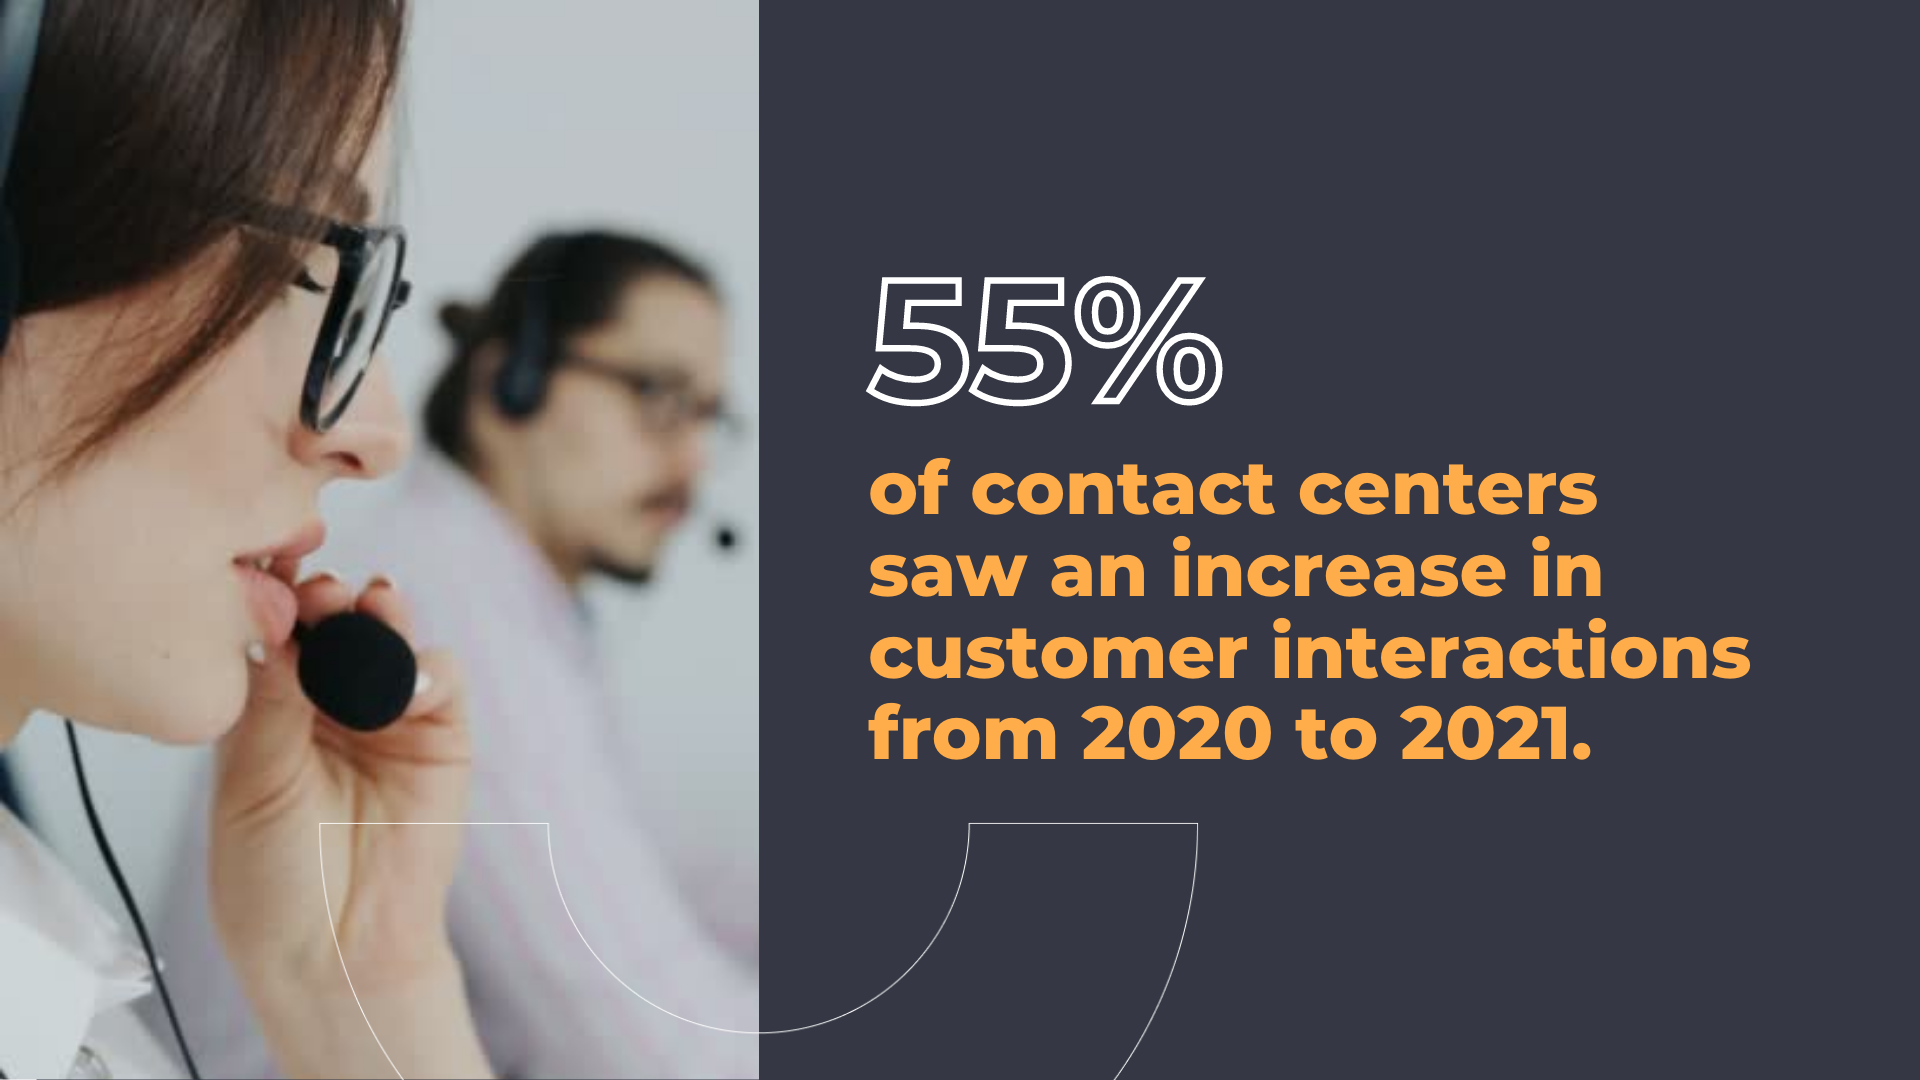 55% of contact centers saw an increase in customer interactions from 2020 to 2021.